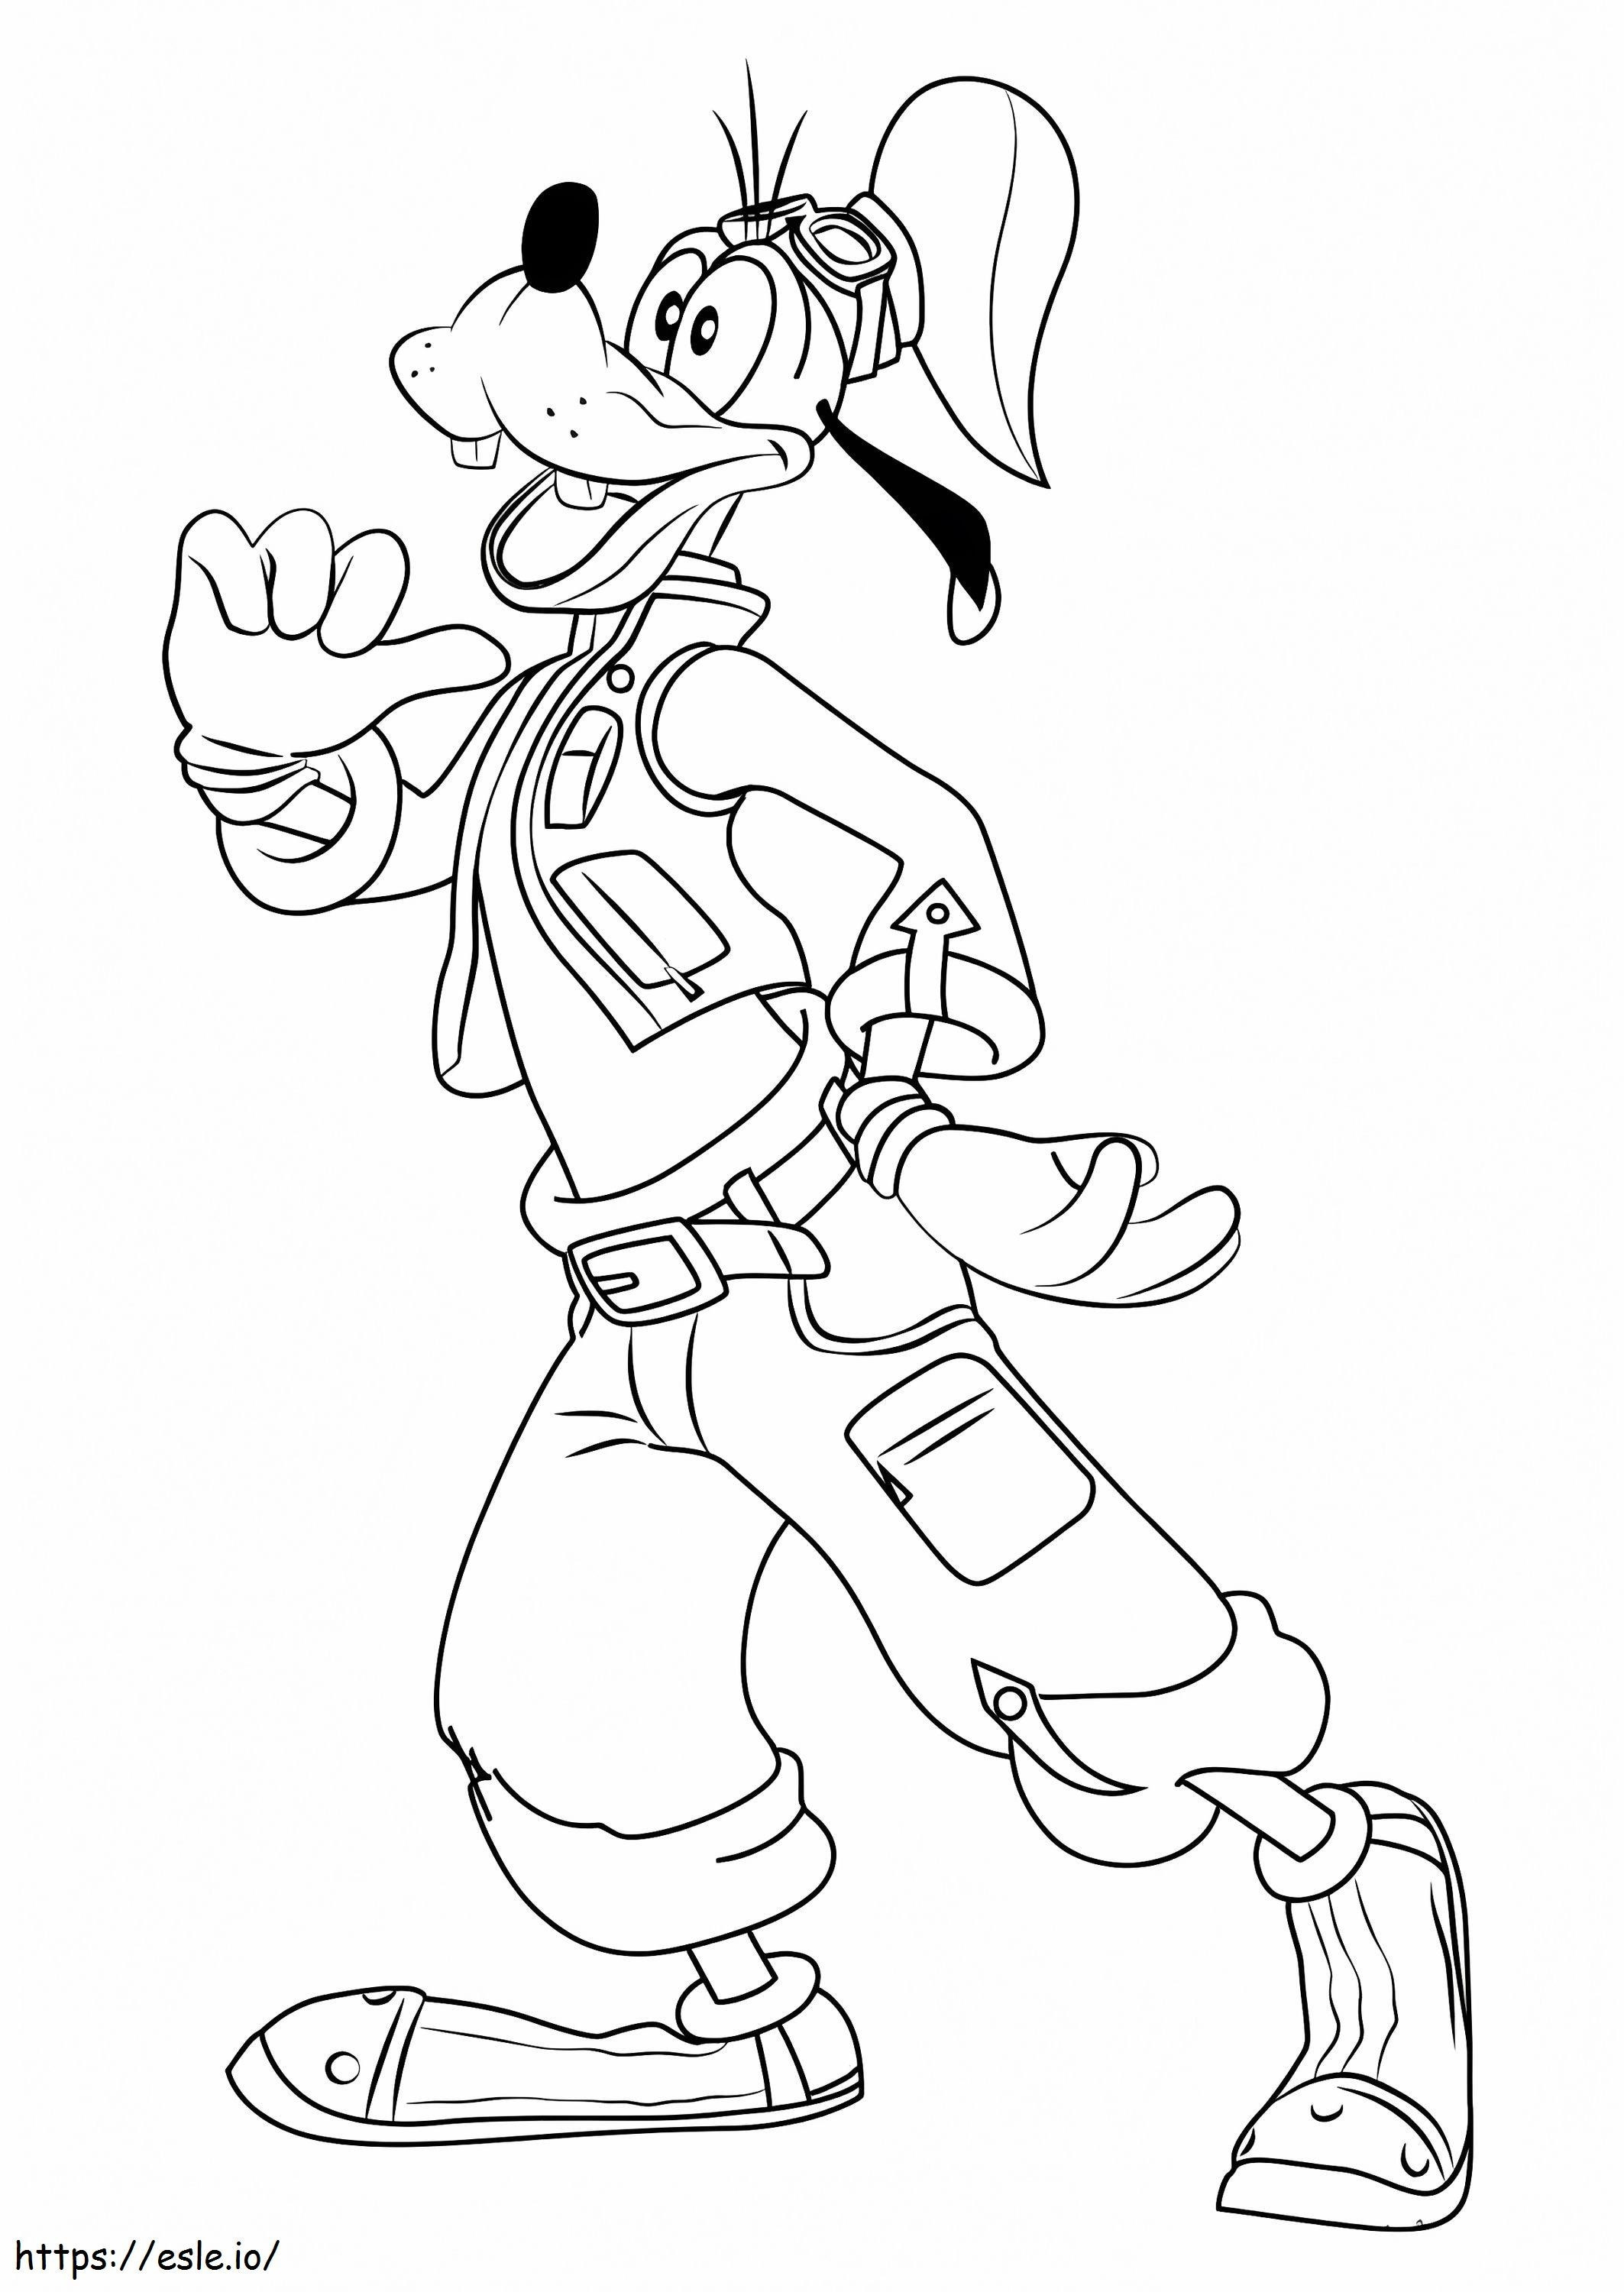 Goofy From Kingdom Hearts coloring page